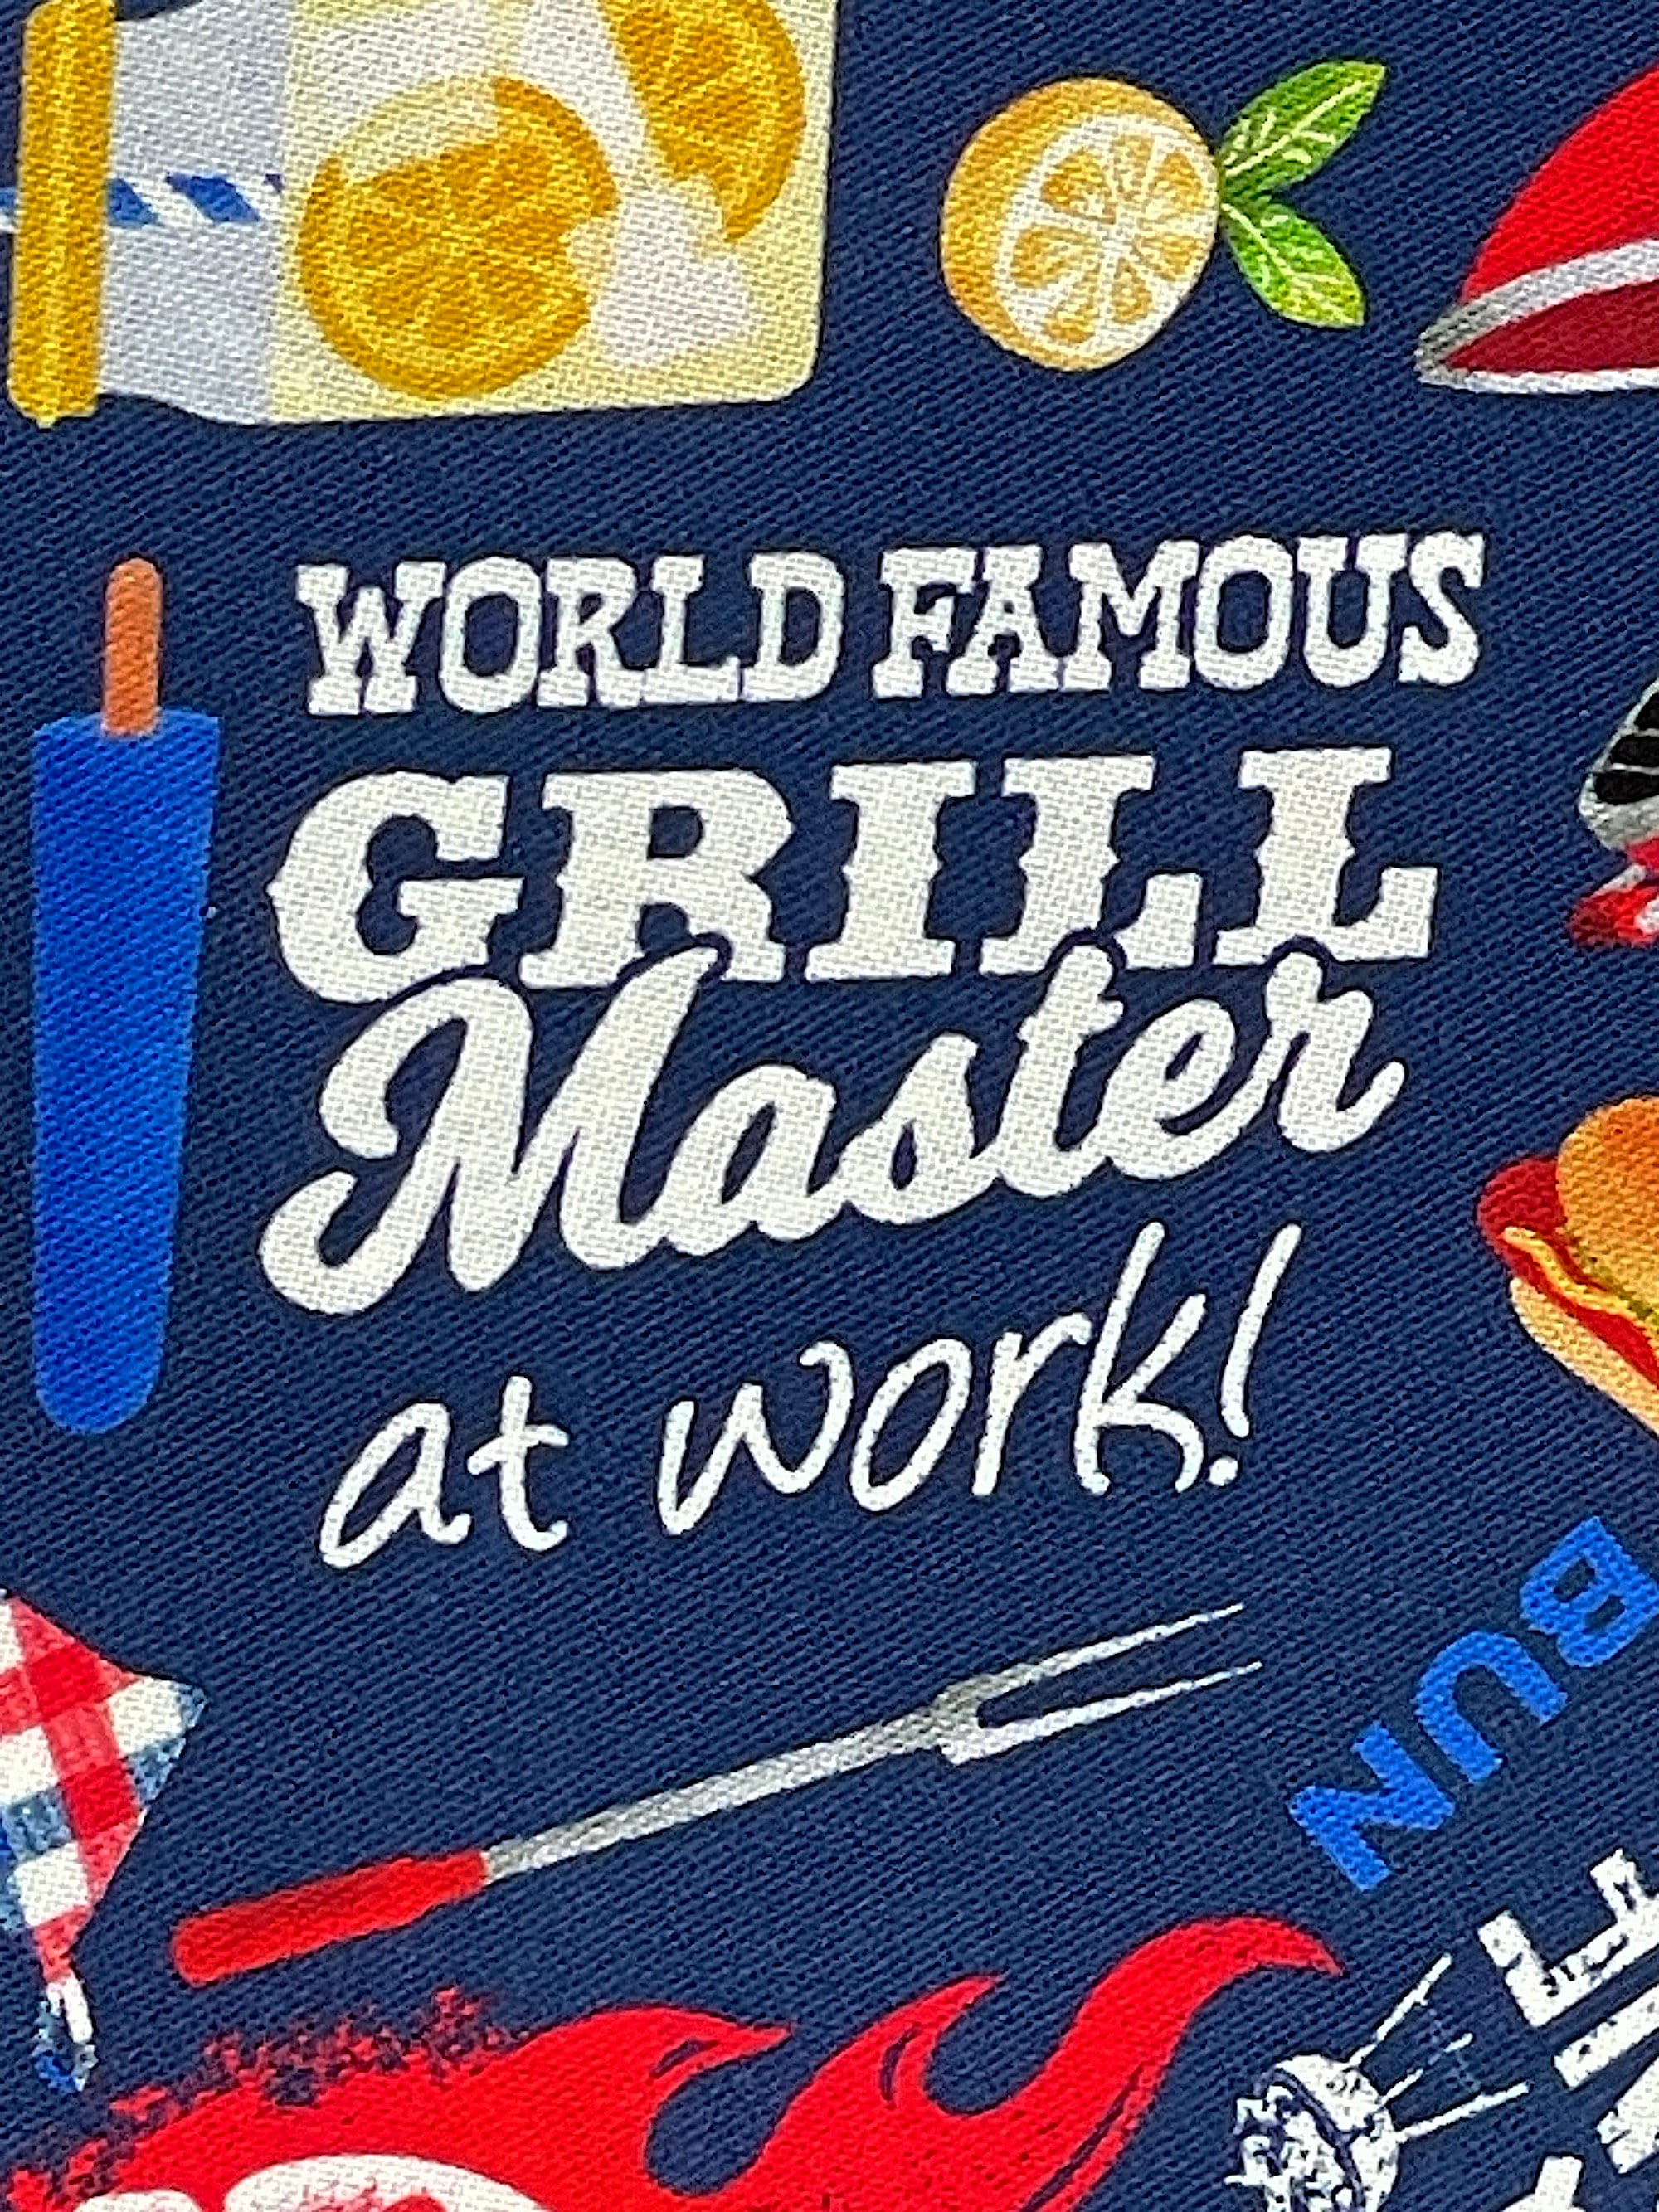 Close up of world famous grill master at work.